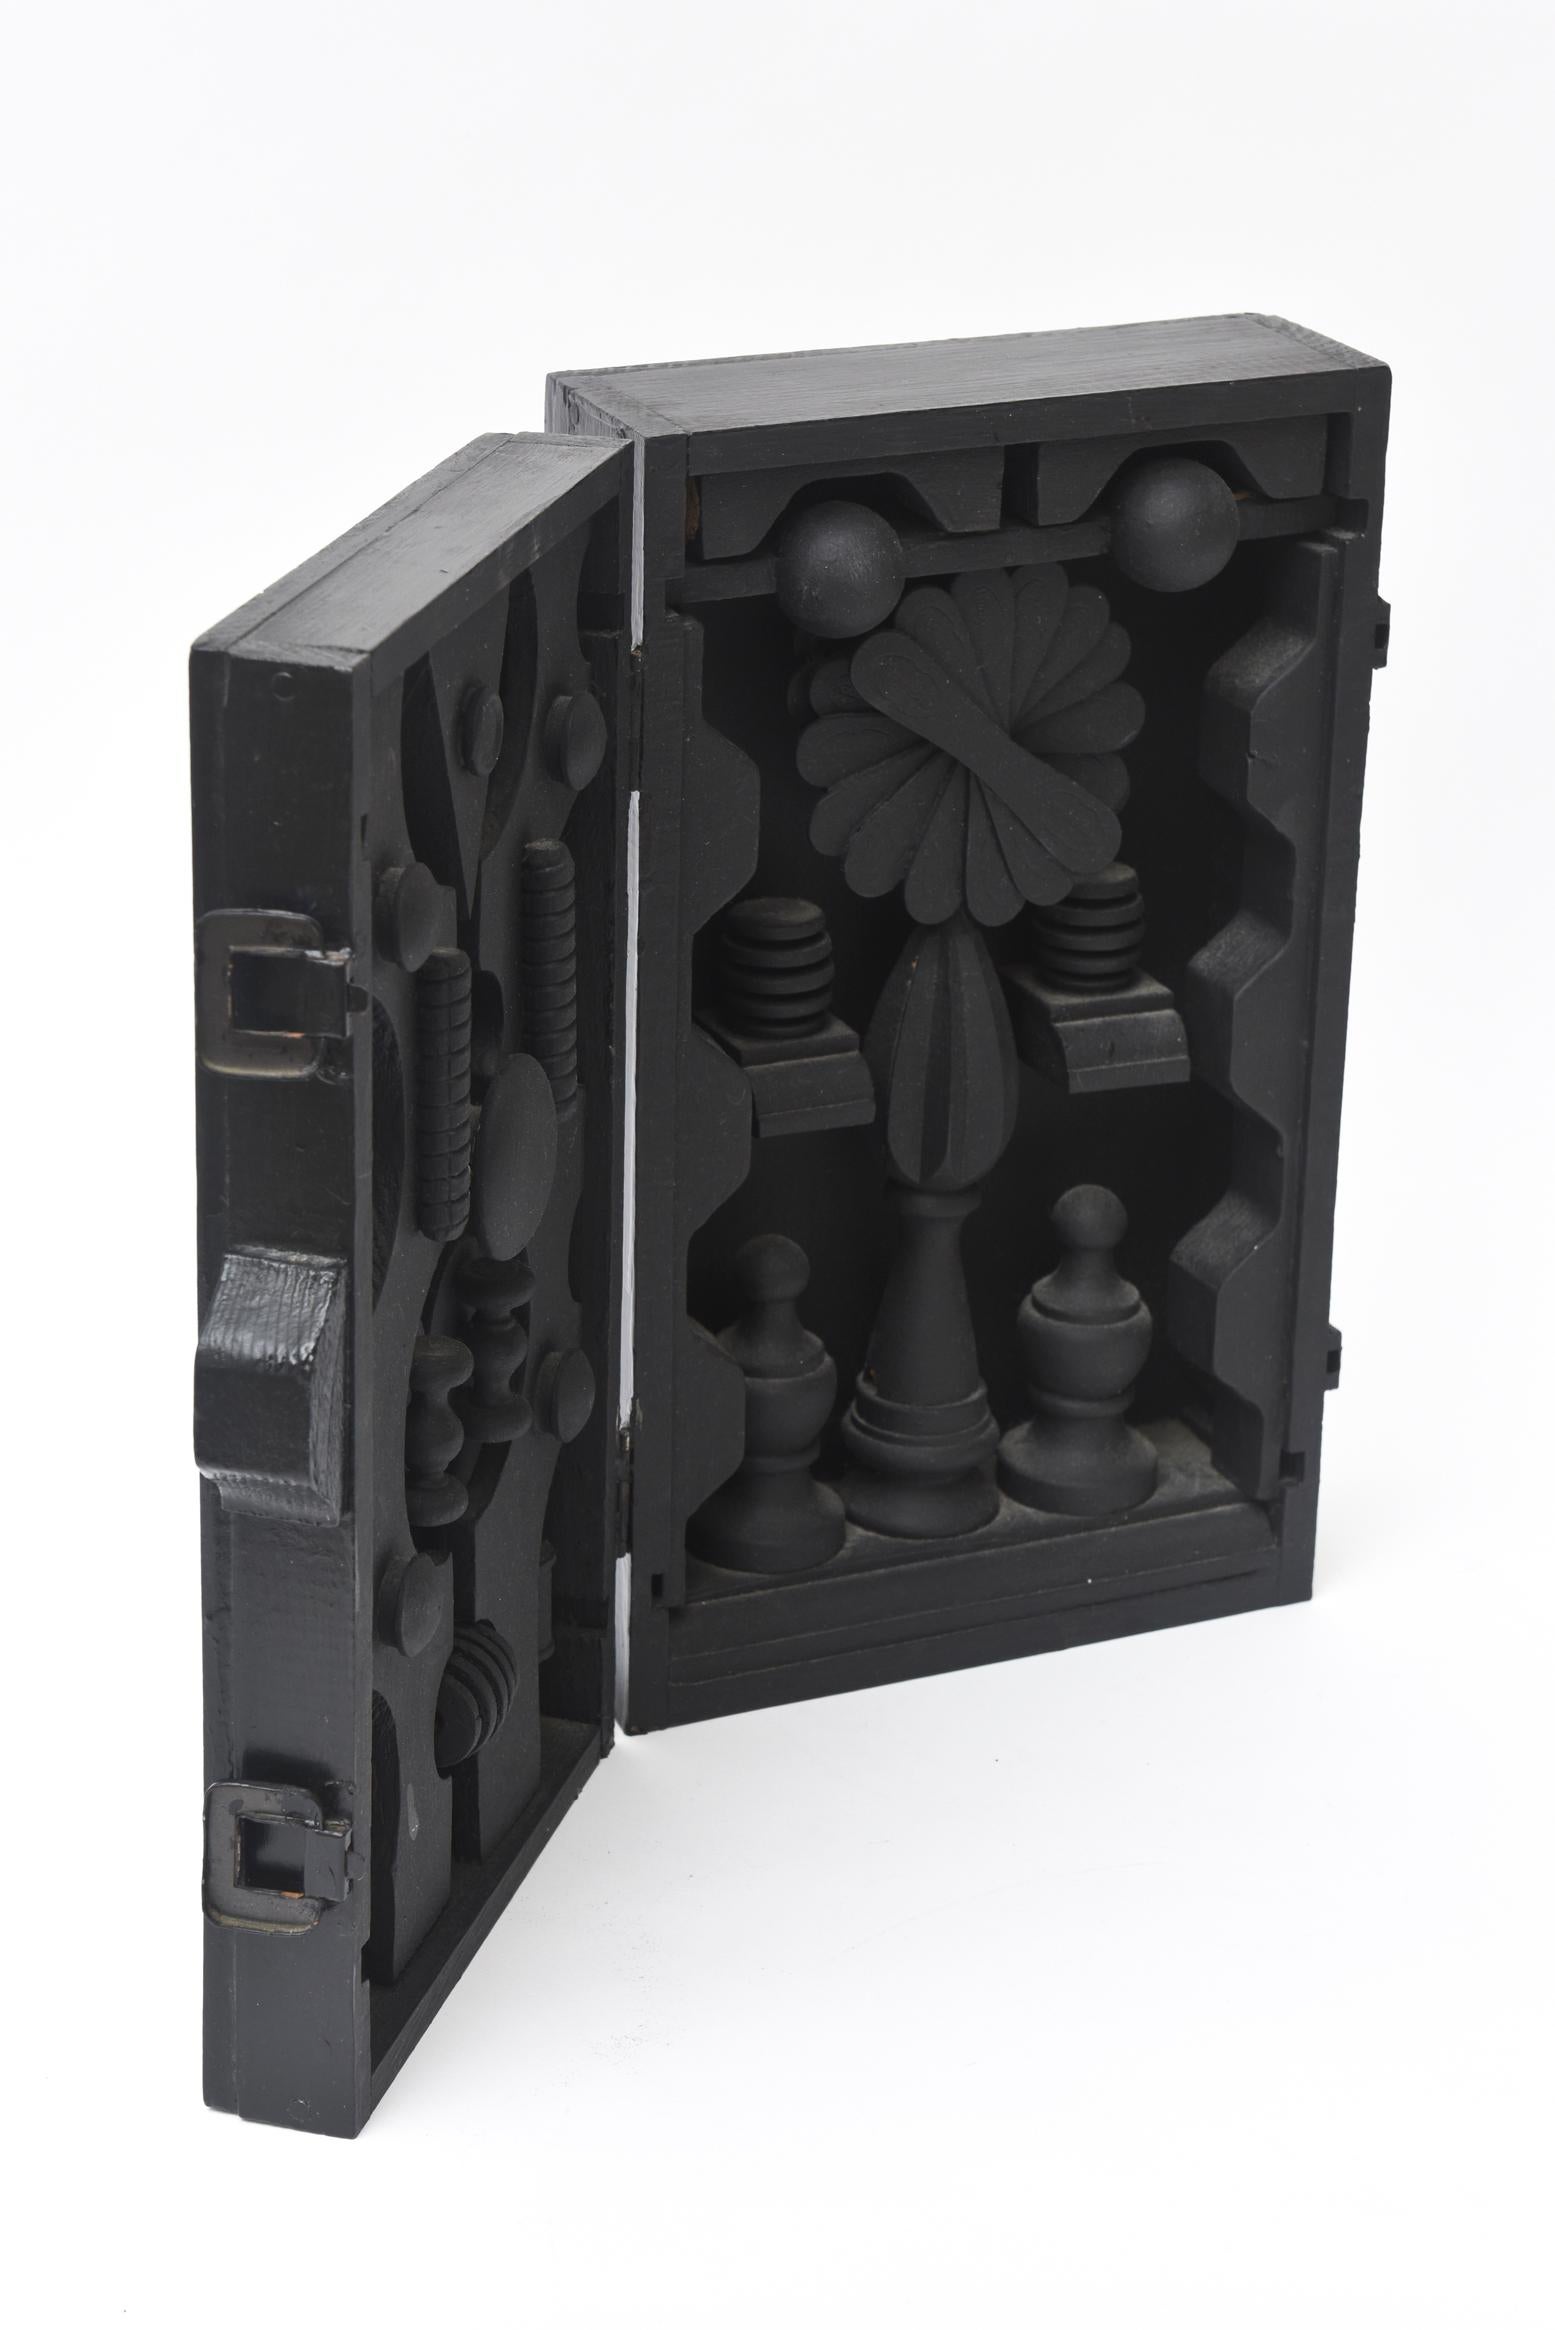 louise nevelson boxes